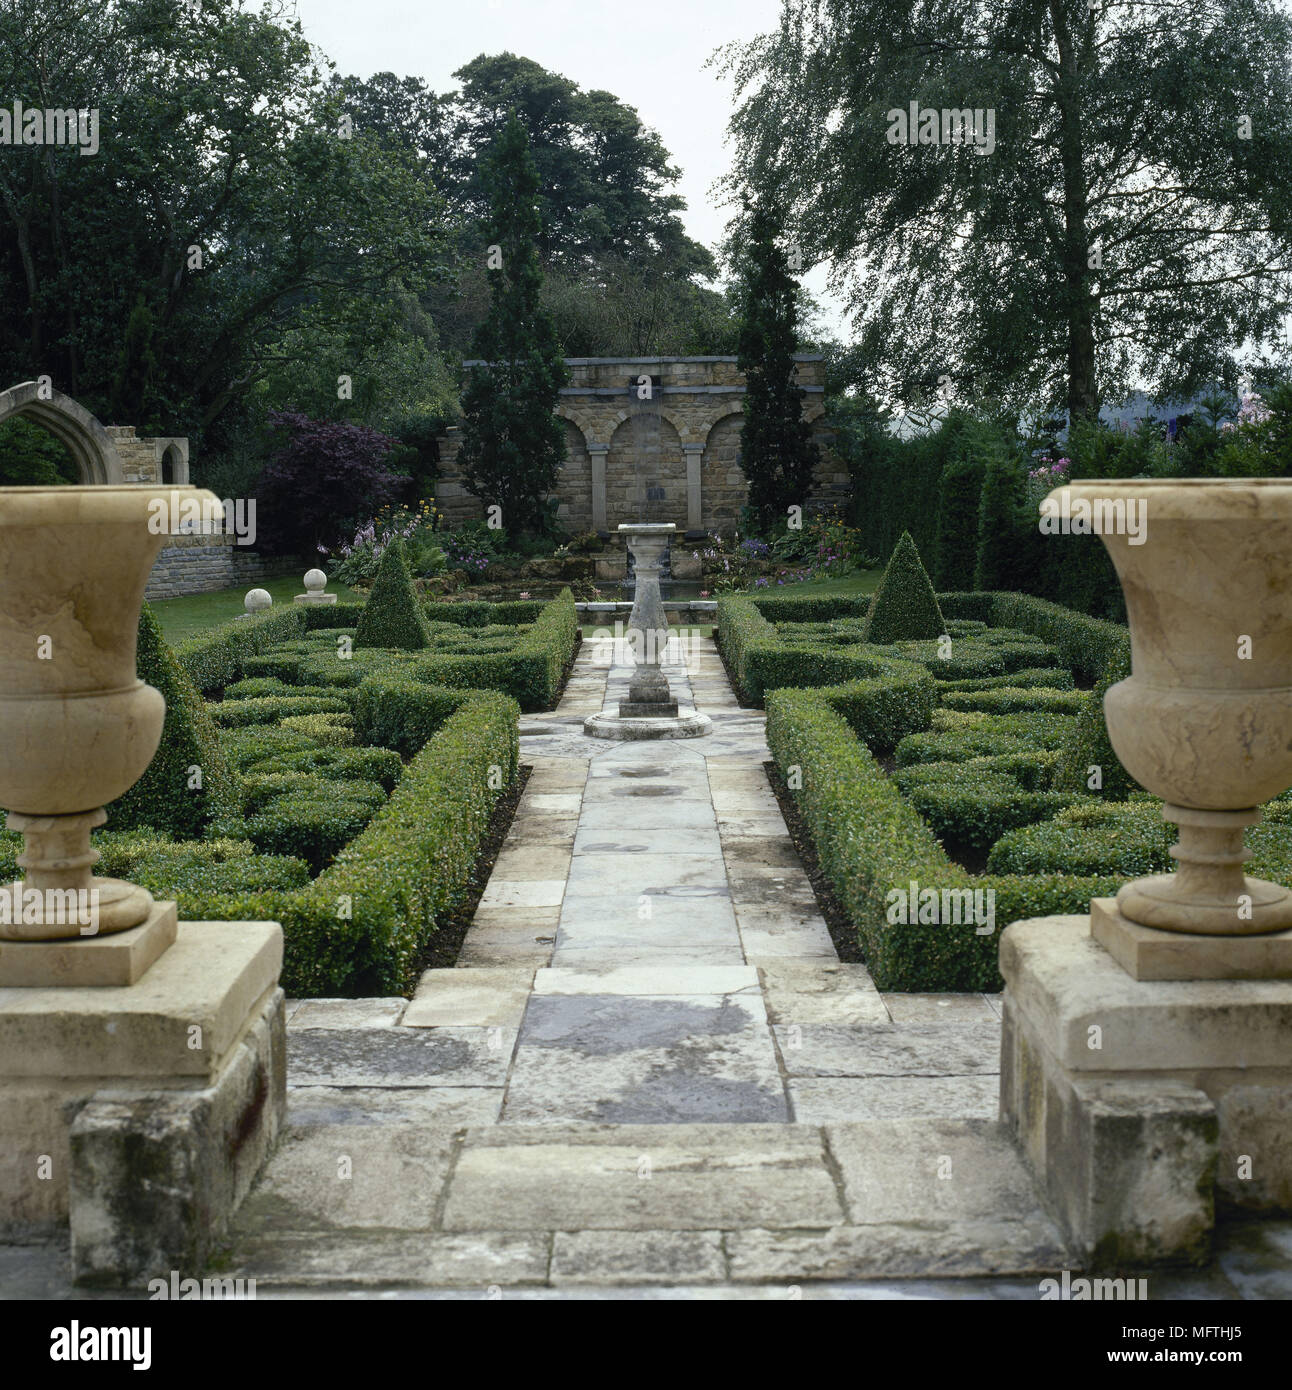 Formal garden stone urns, topiary, and a paved pathway through box hedging. Stock Photo